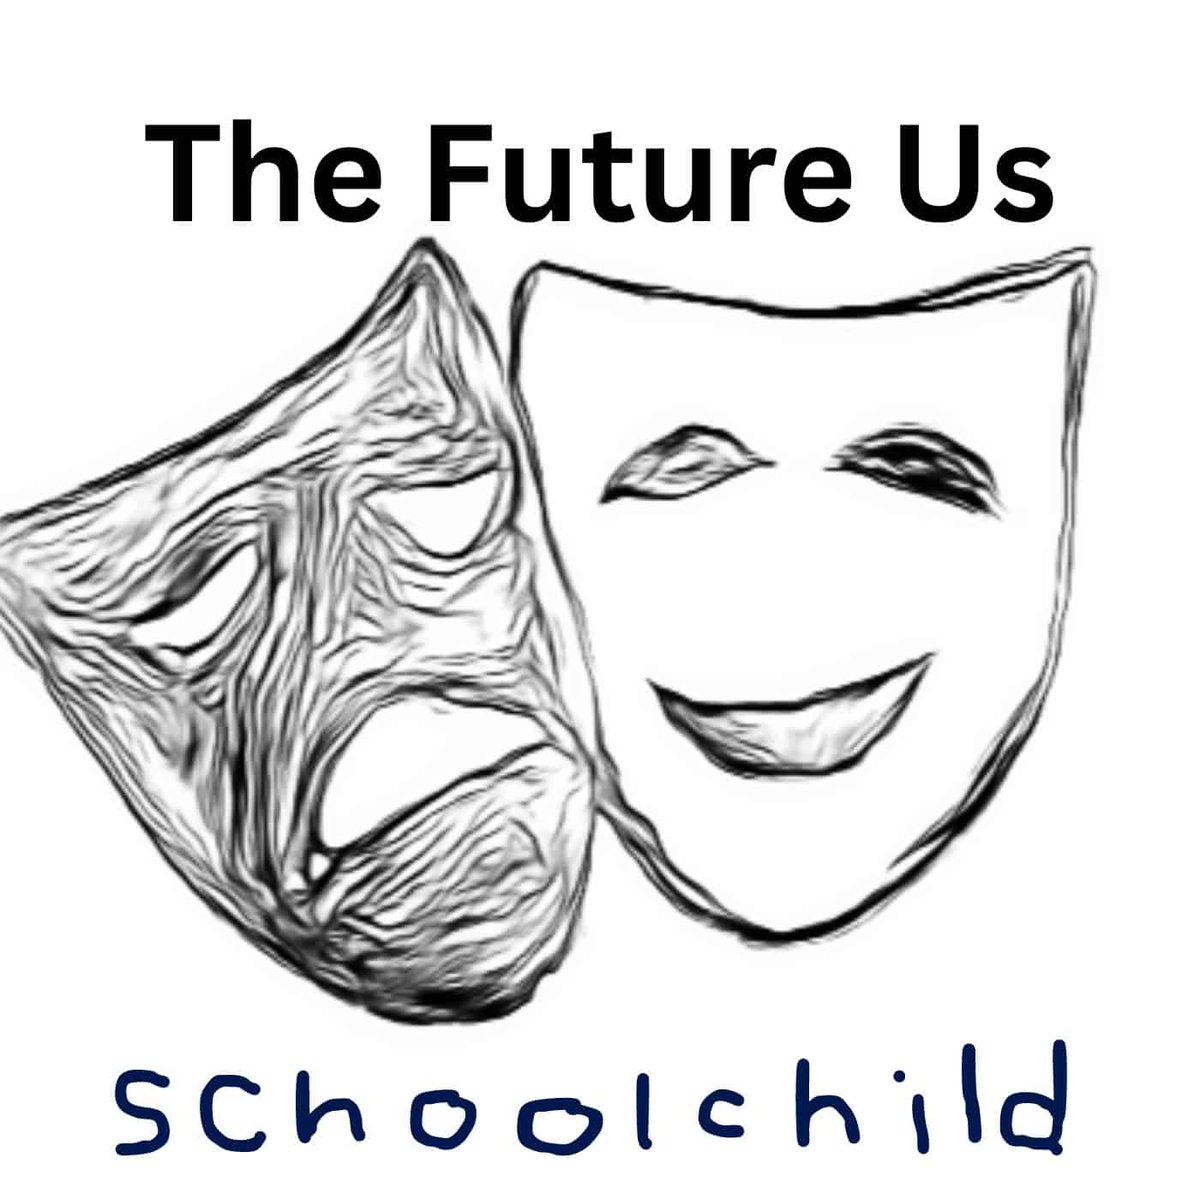 Now Playing on RADIO WIGWAM - 'Schoolchild' by The Future Us. Listen at radiowigwam.co.uk/bands/the-futu… @The_Future_Us radiowigwam.co.uk